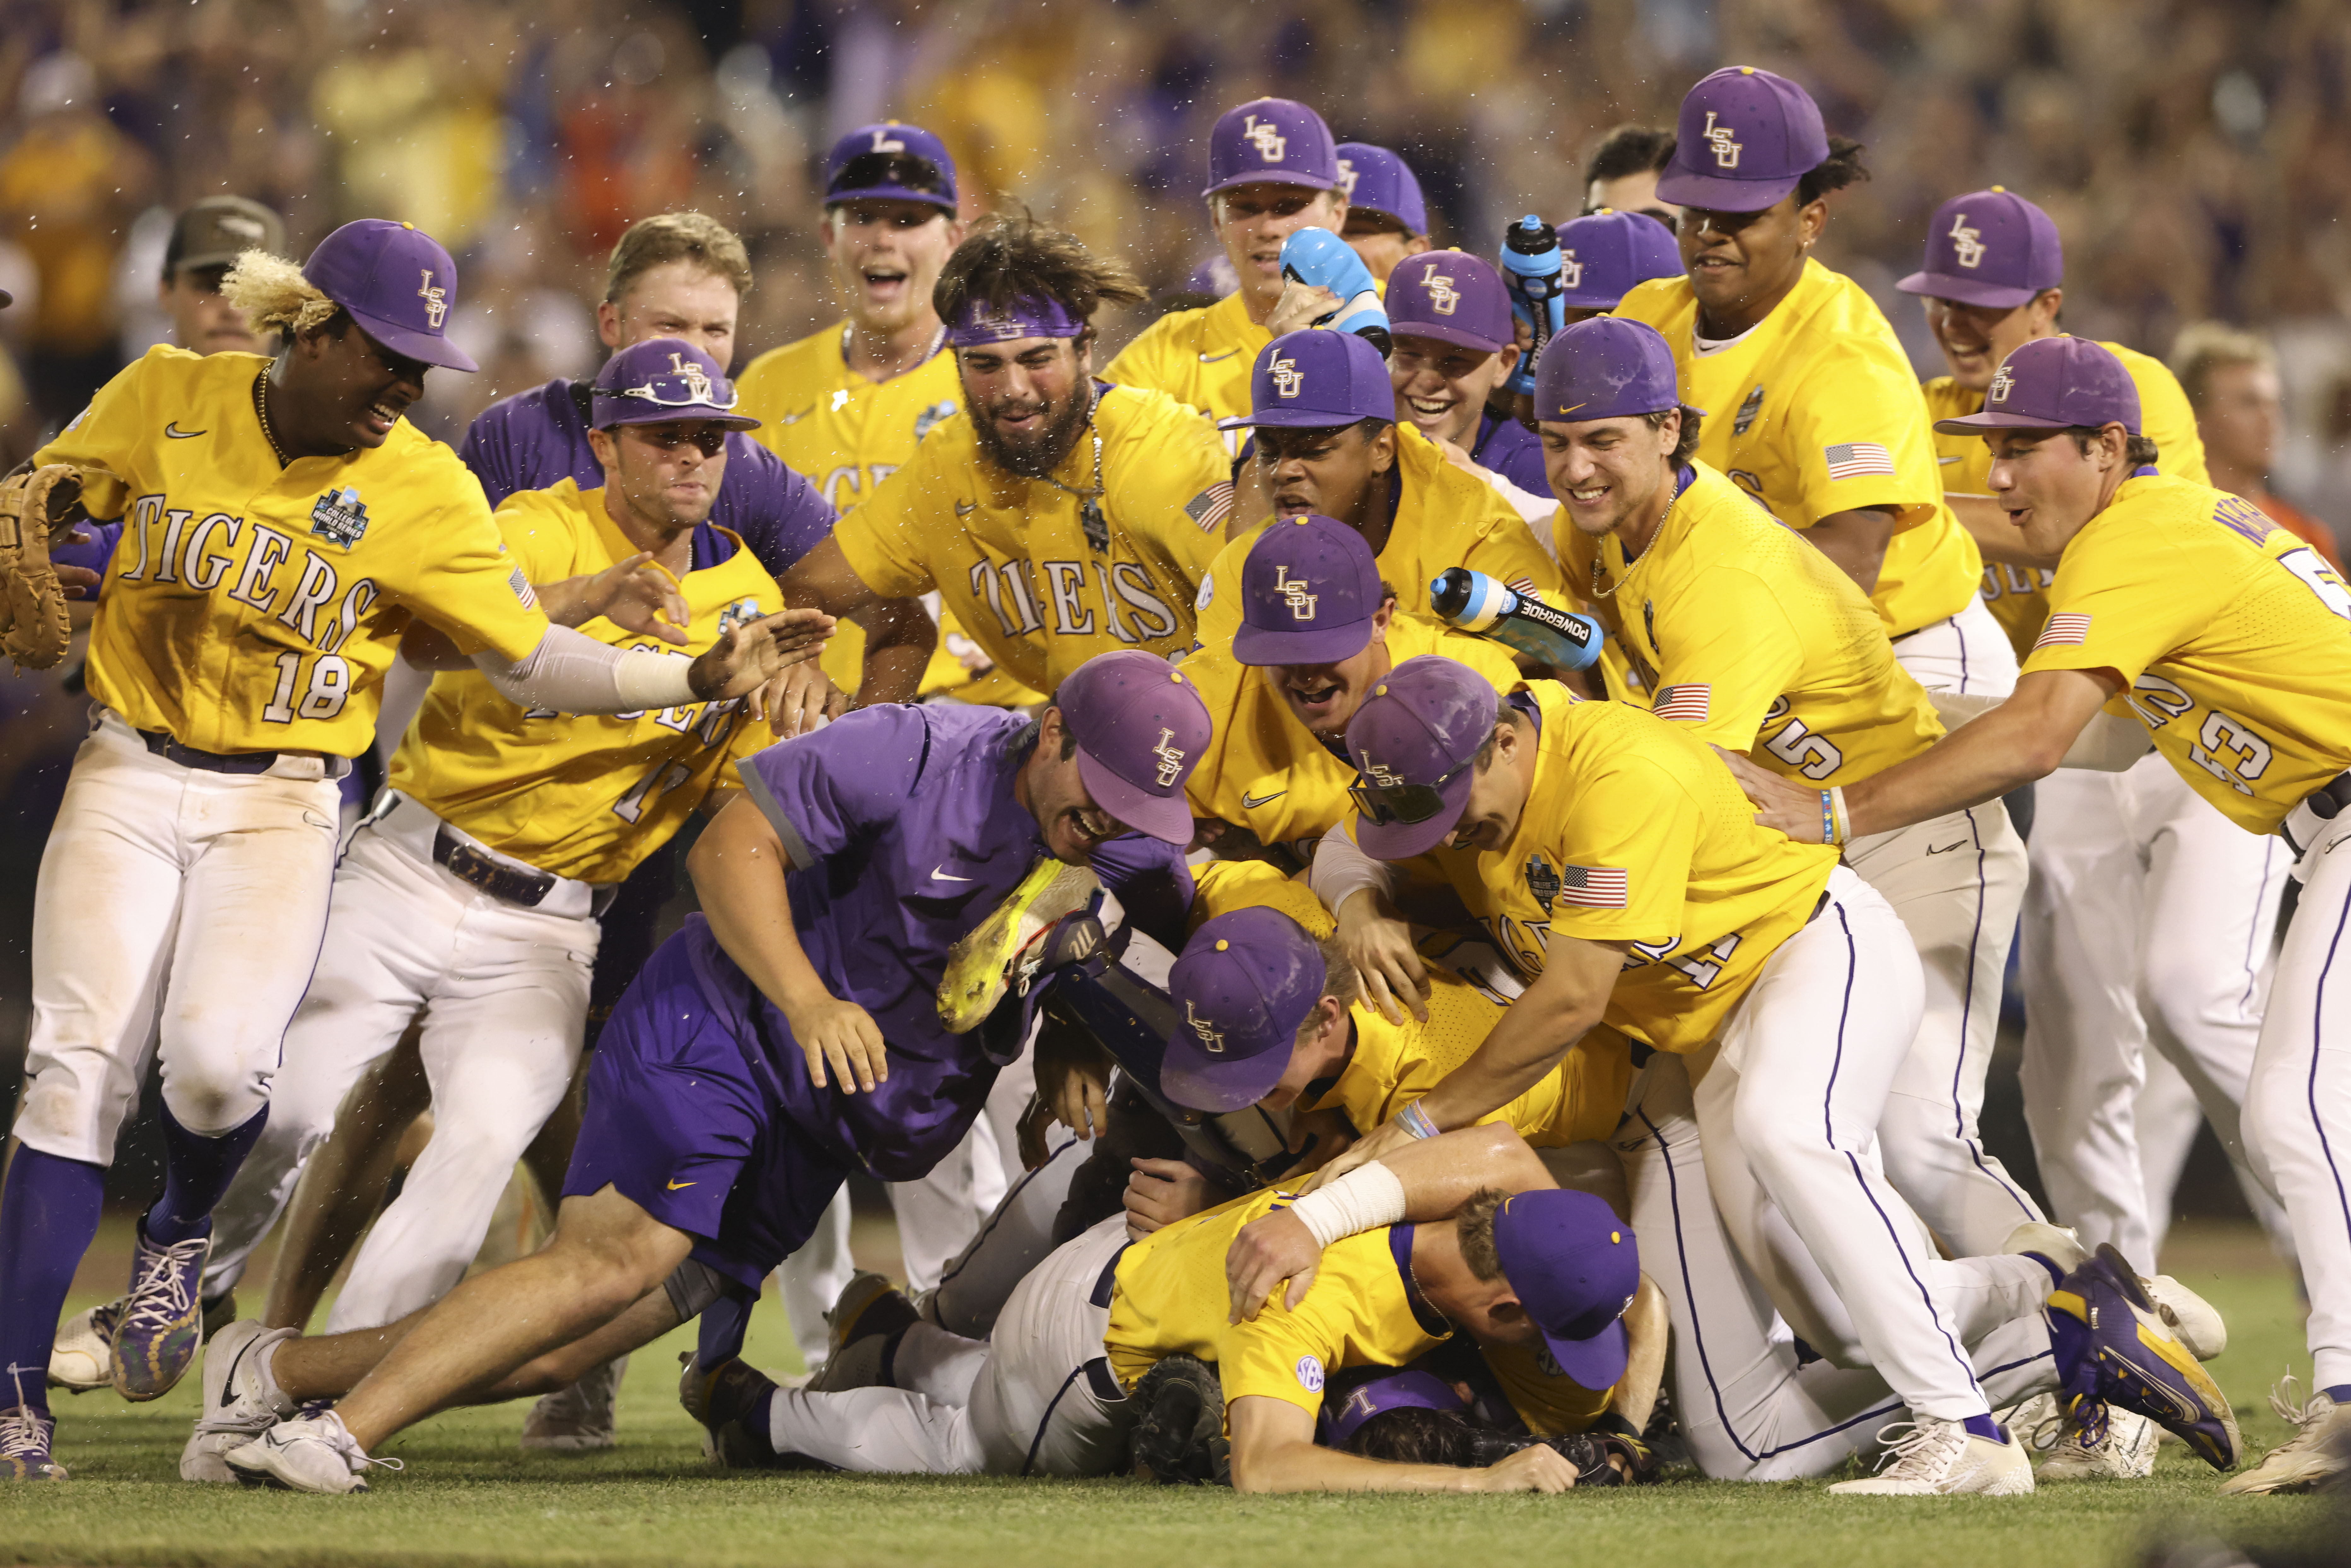 L.S.U. Crushes Florida, 18-4, to Win Baseball National Title - The